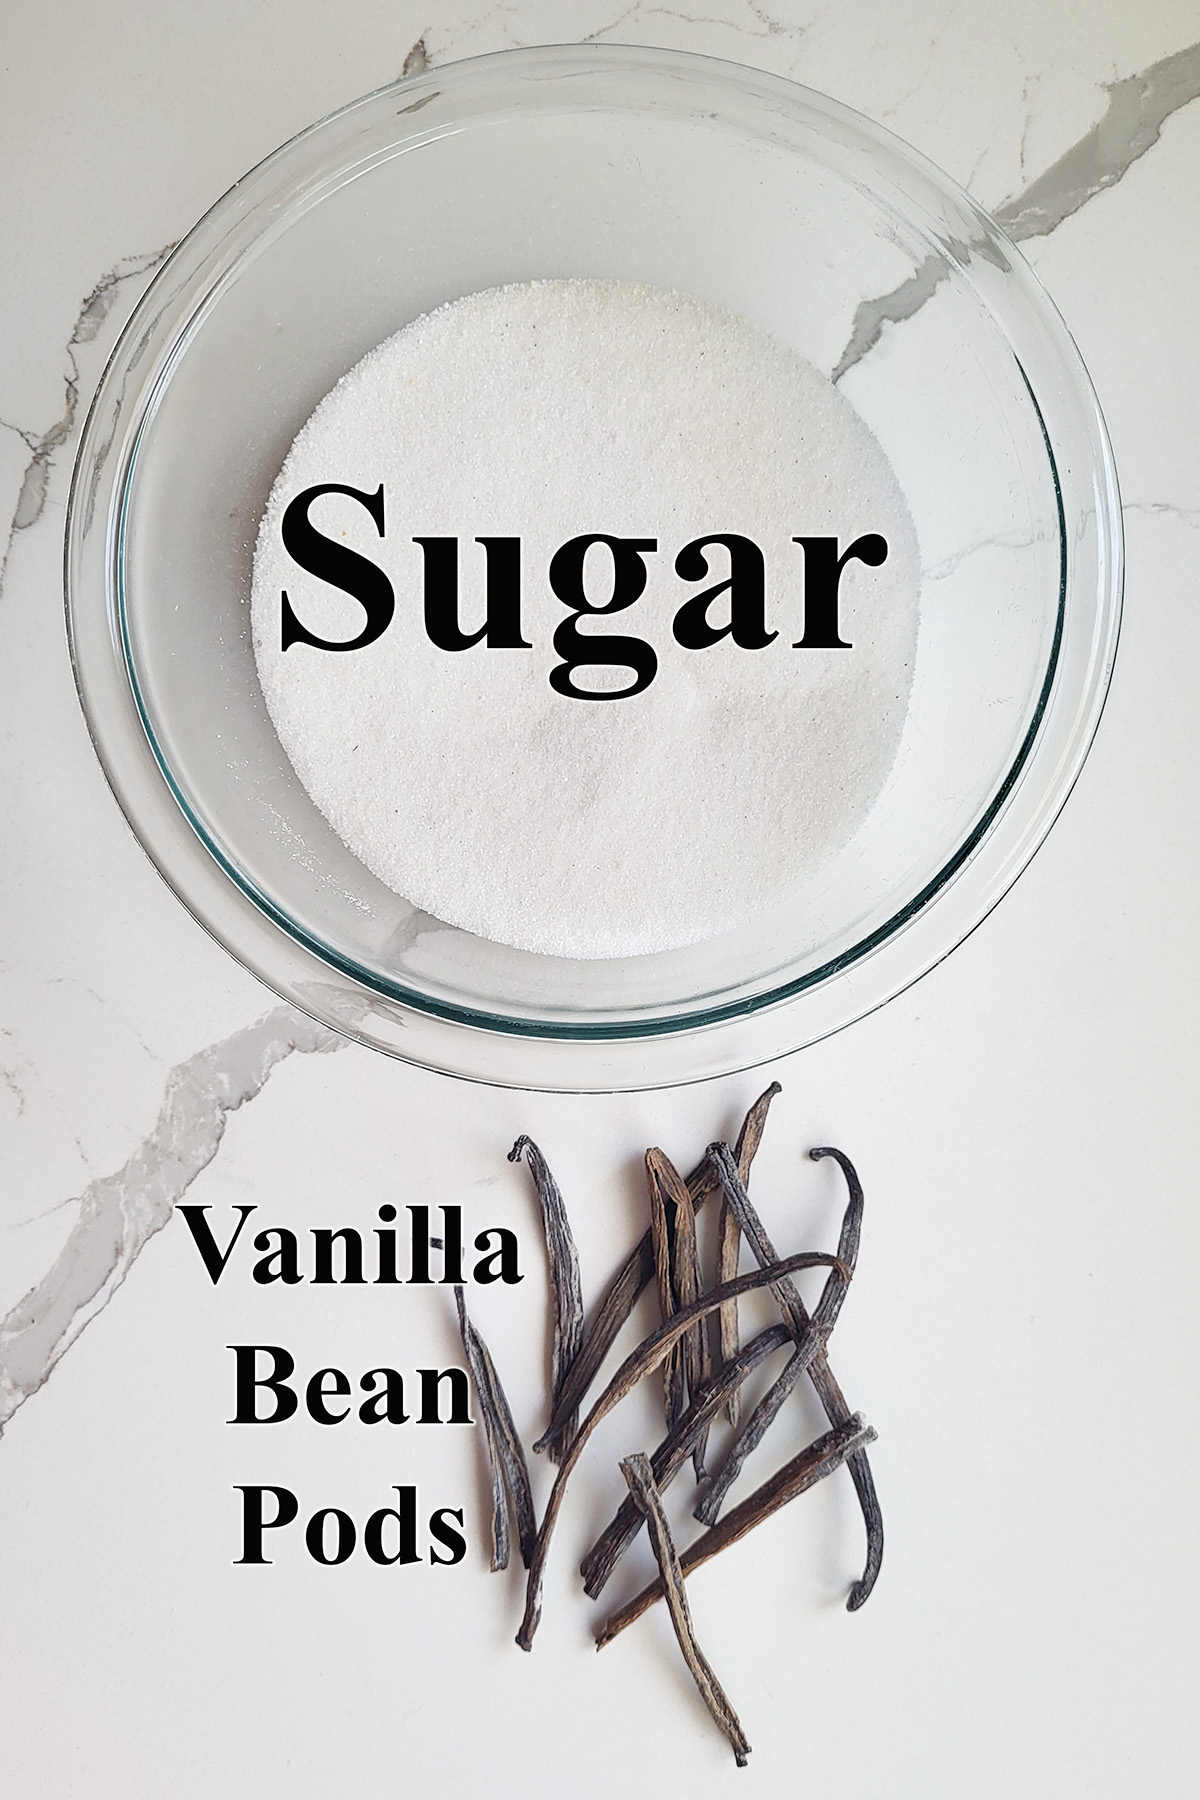 ingredients for vanilla sugar in glass bowls.